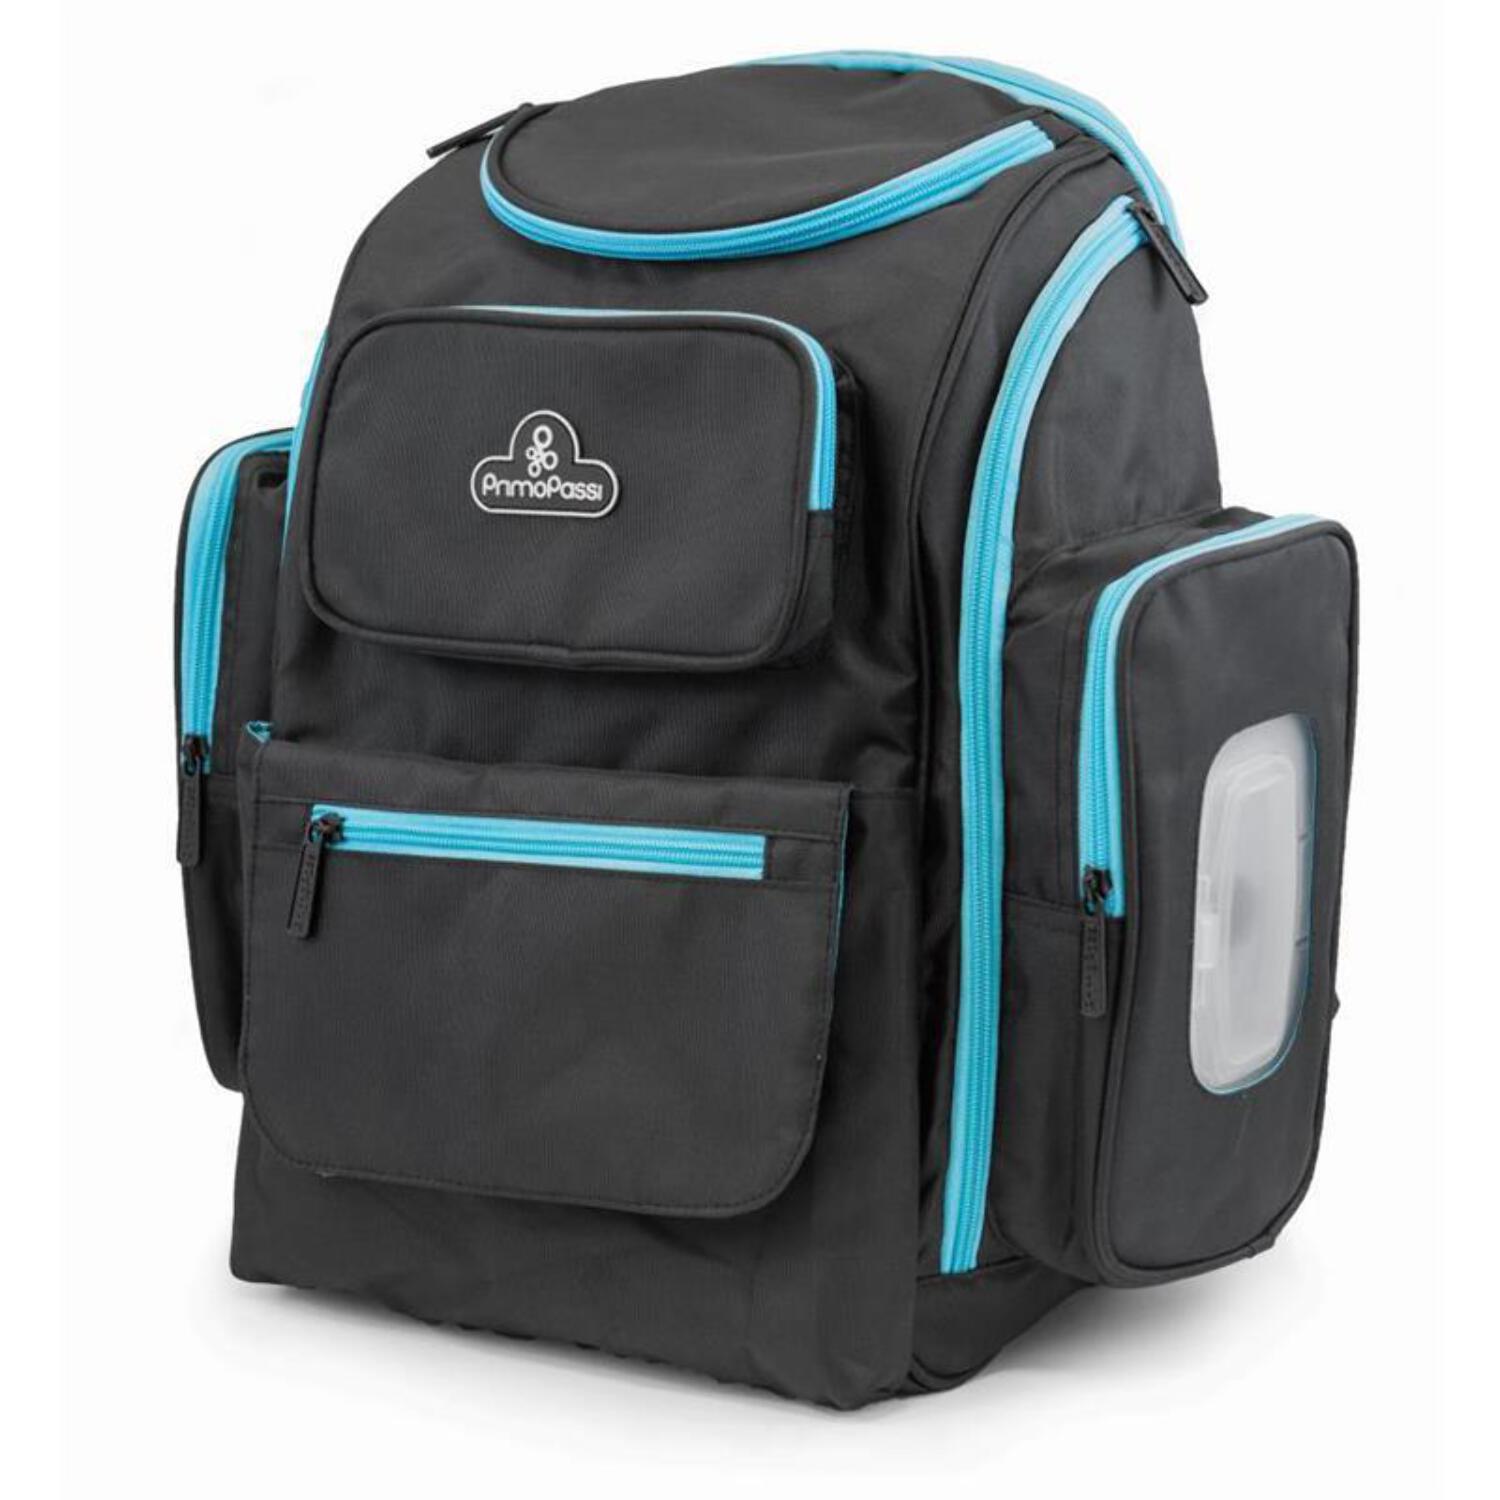 Primo Passi - Blue Backpack Diaper Bag - image 1 of 9